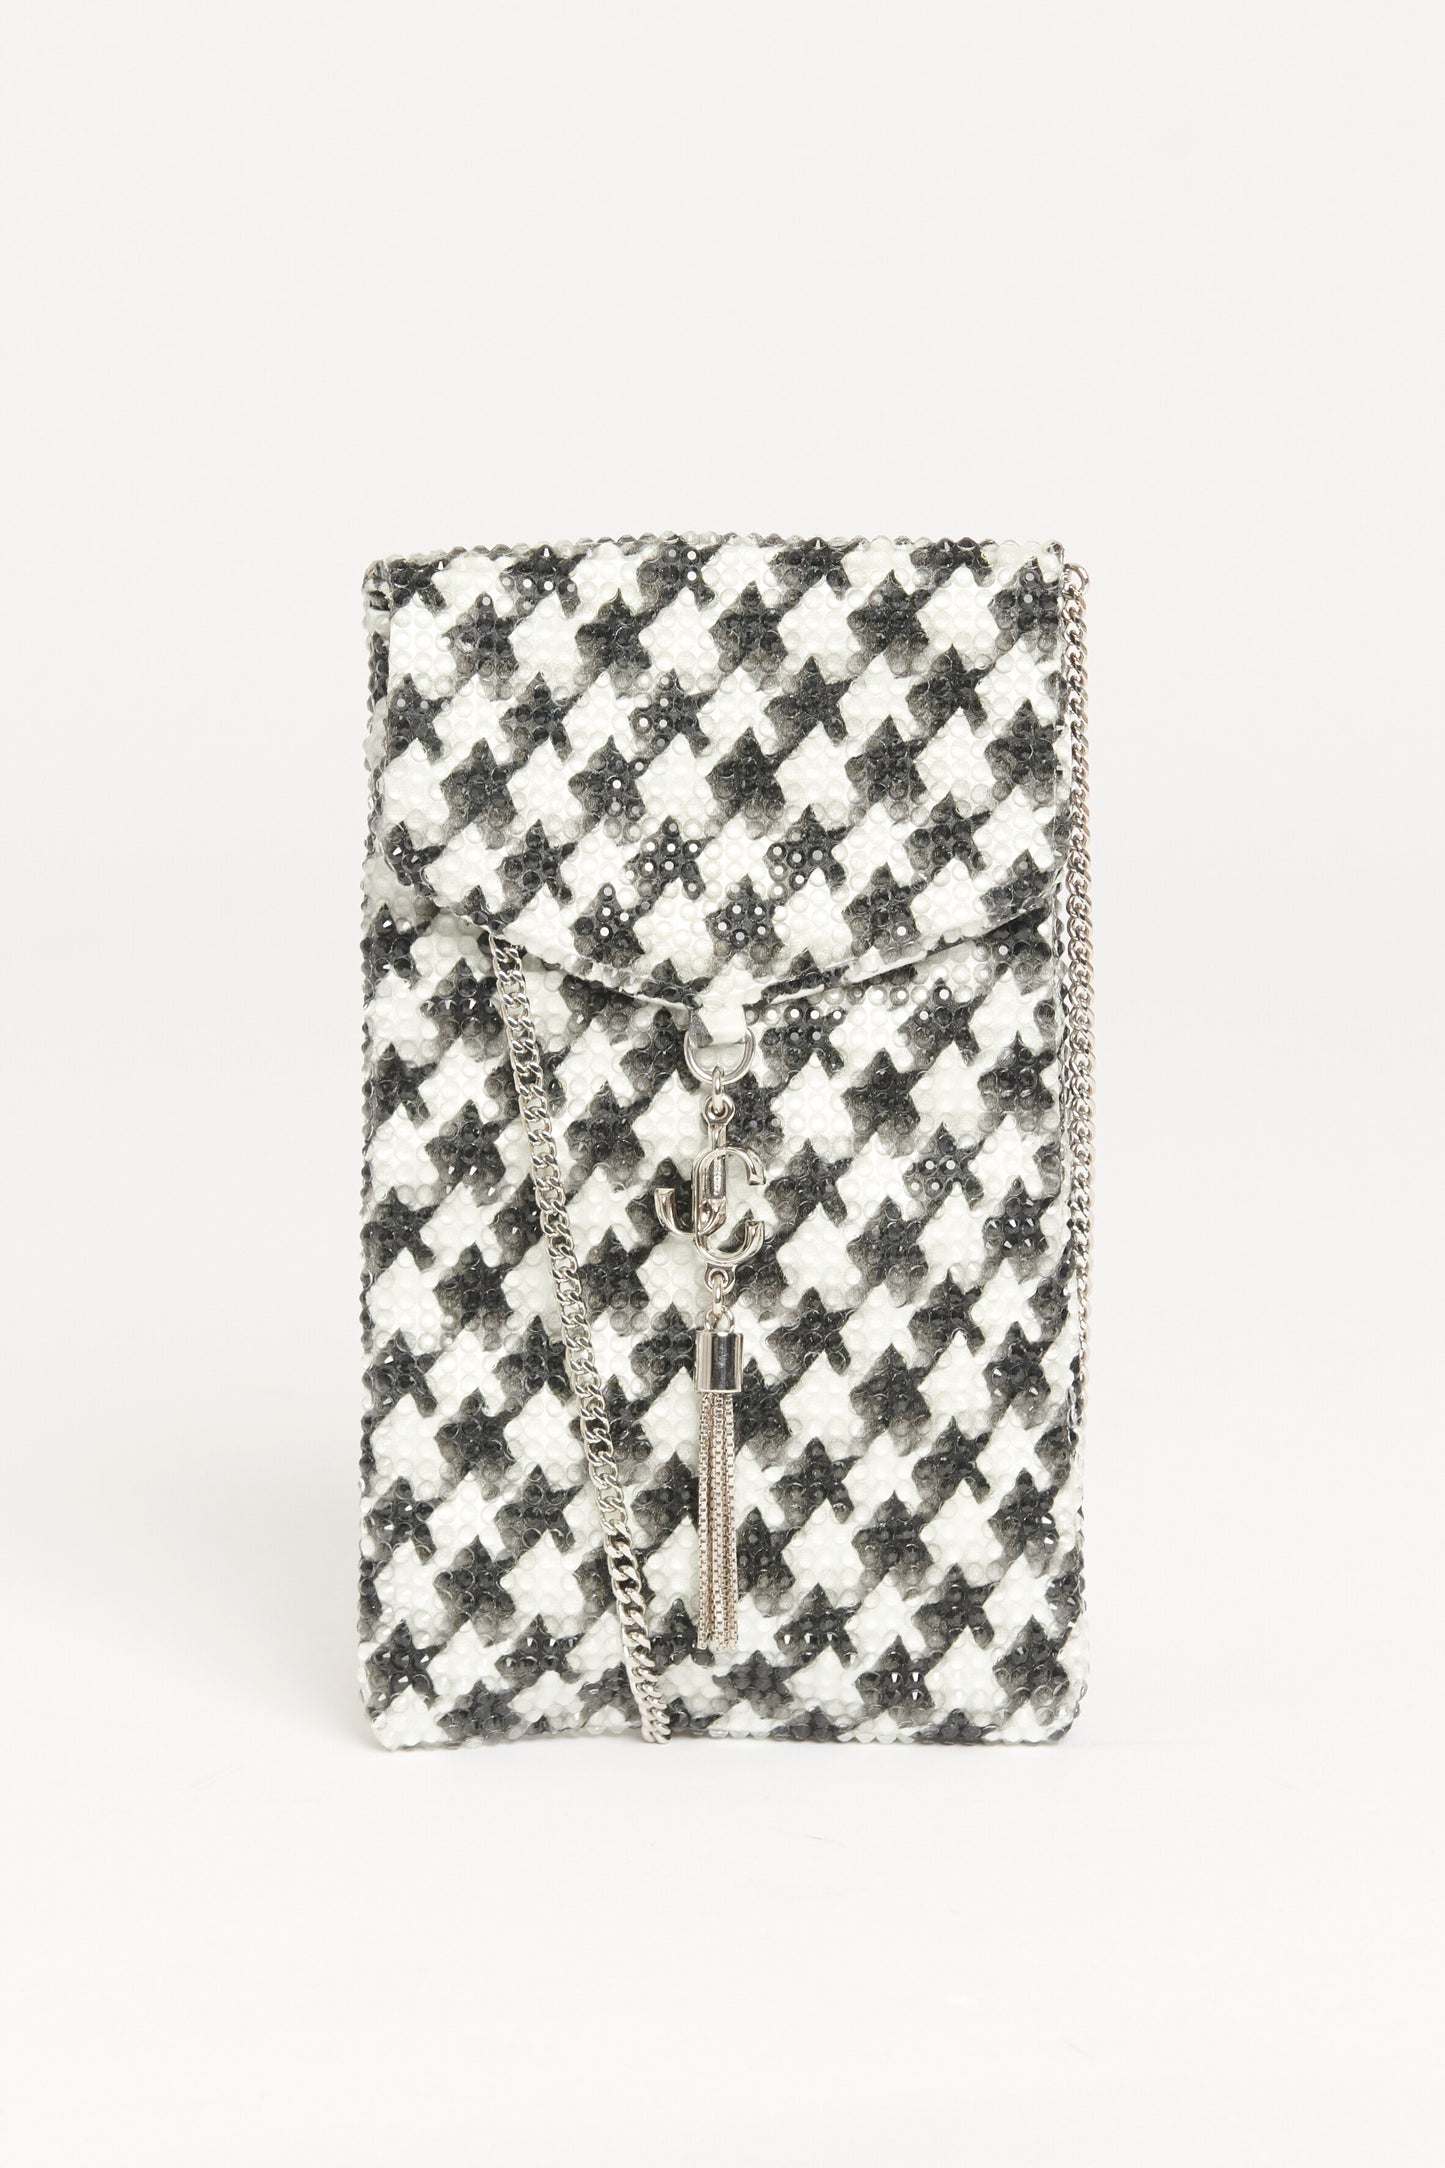 2021 Monochrome Houndstooth Preowned Crystal Embellished Phone Case